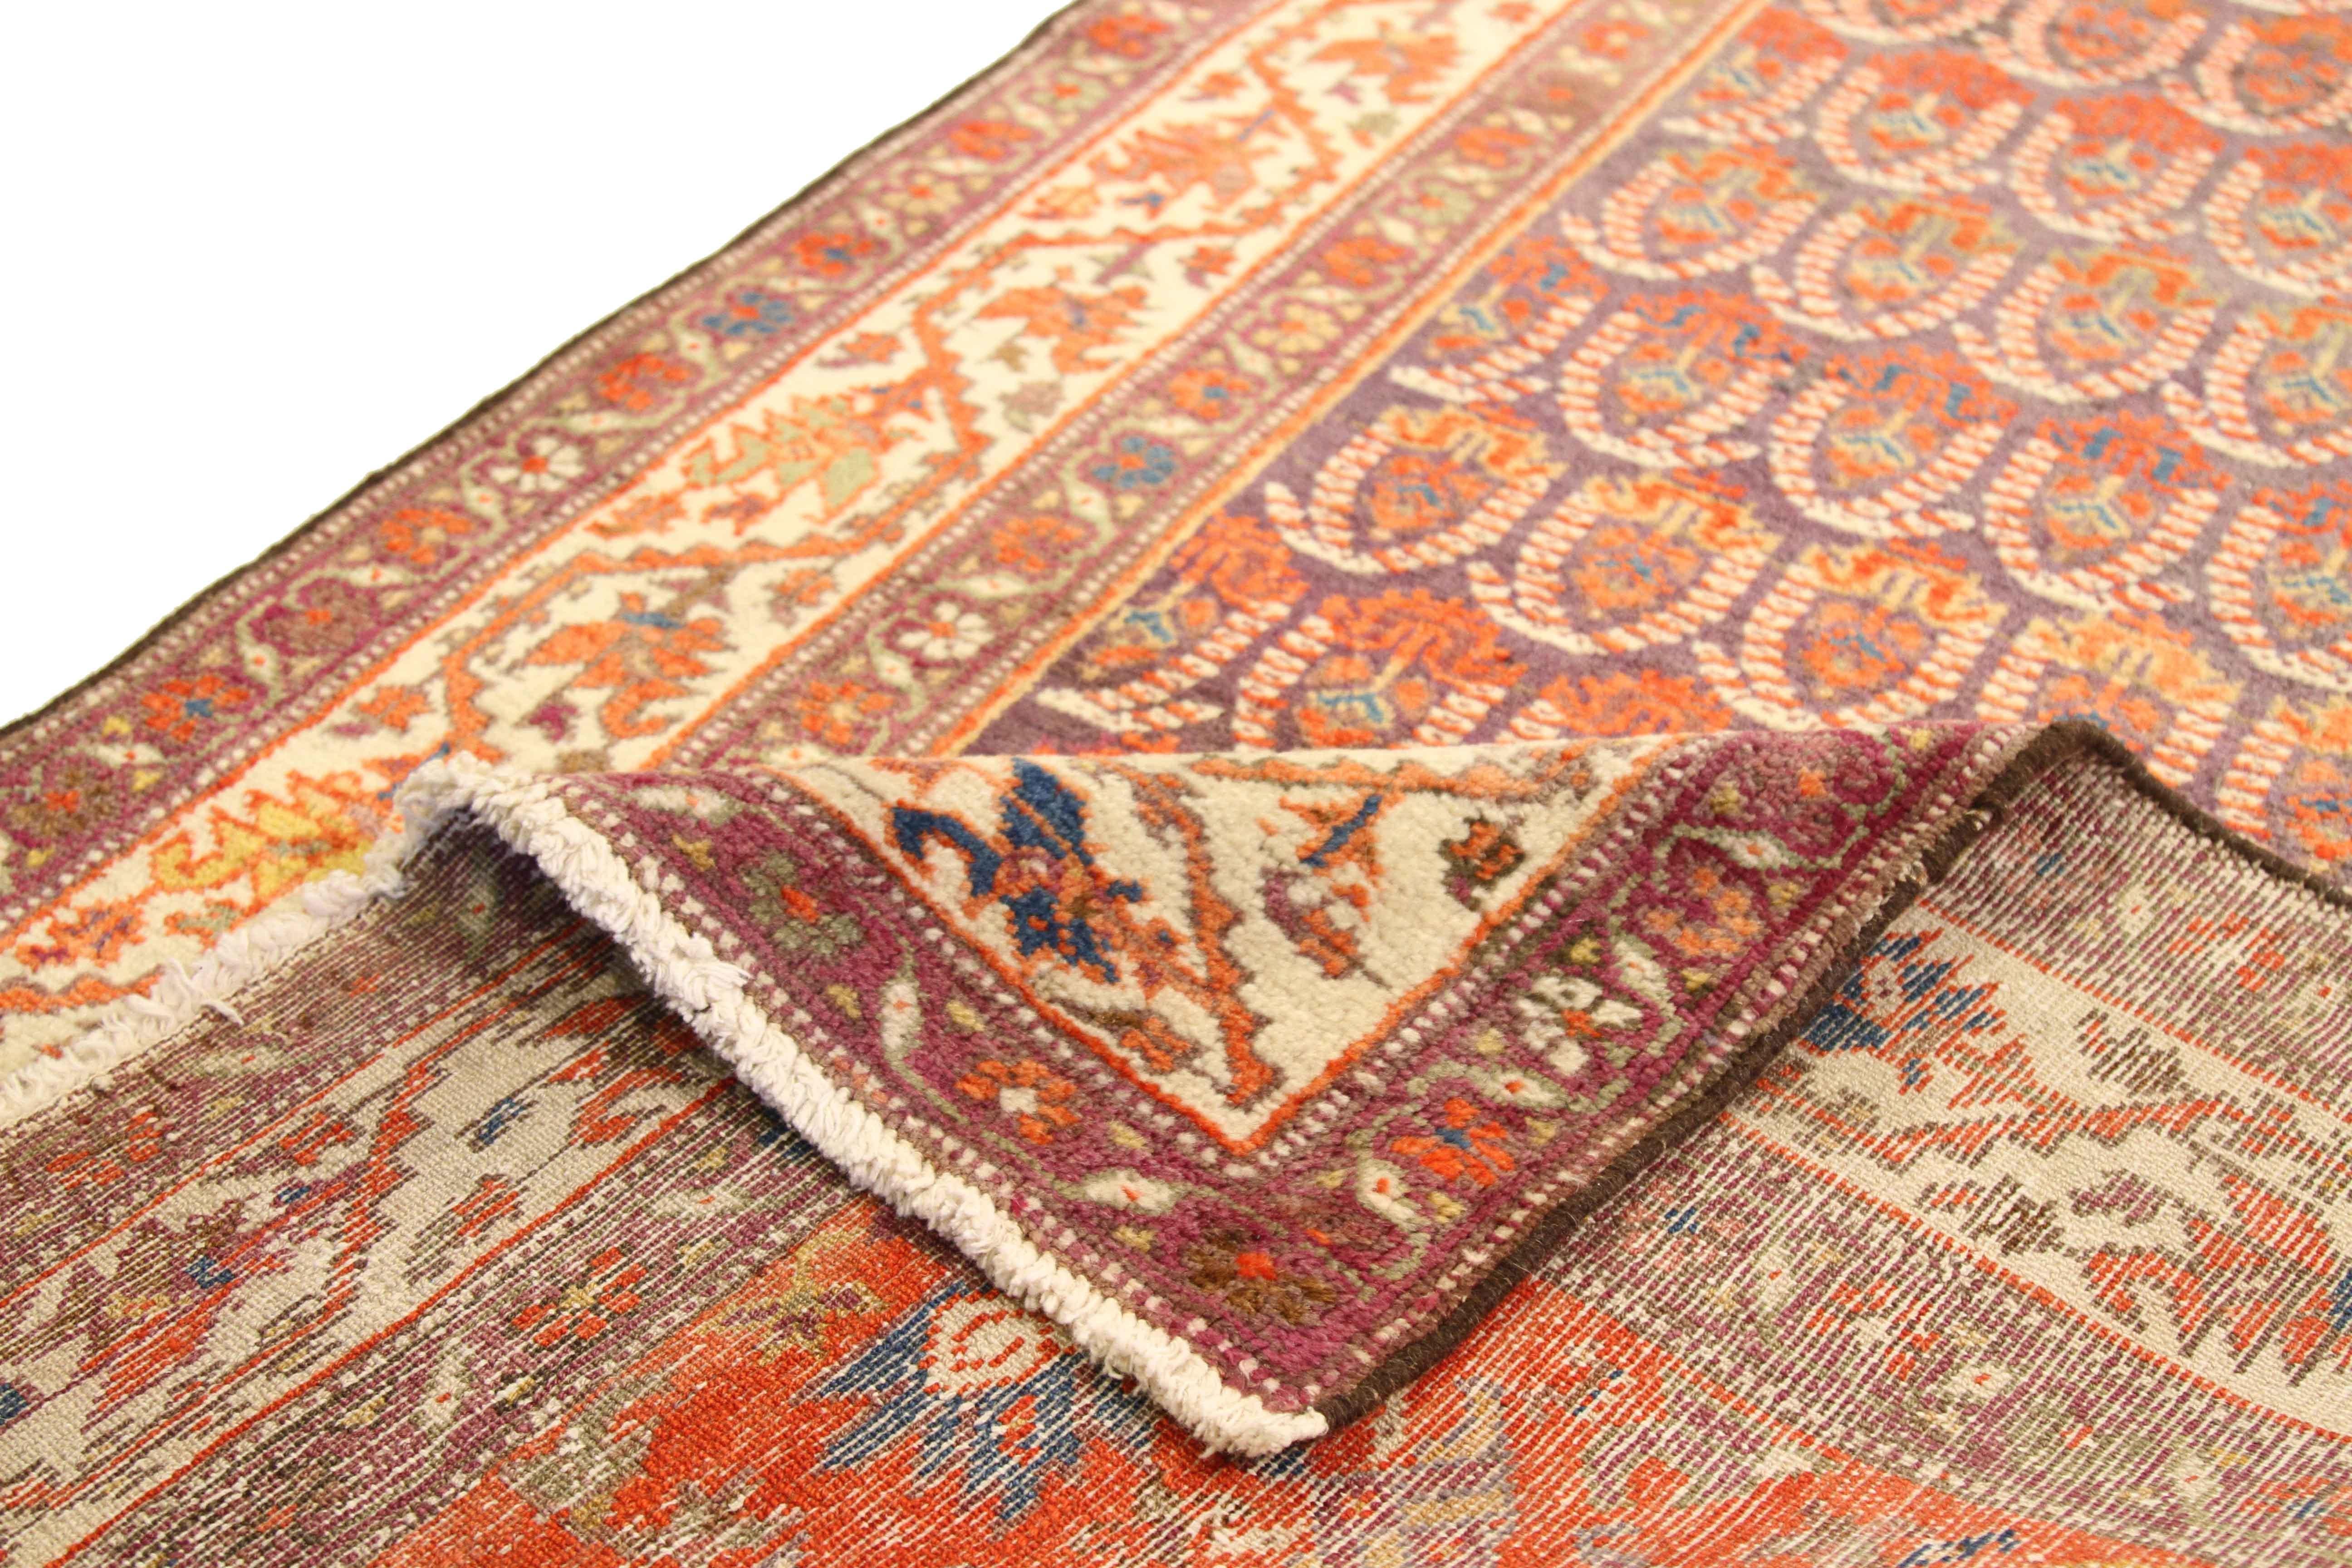 Made from the finest wool and natural vegetable dyes, this antique Persian rug features repeating patterns of traditional emblems reminiscent of ancient Persian royalty. The blend of majestic hues like purple, ivory, and red make it an ideal piece